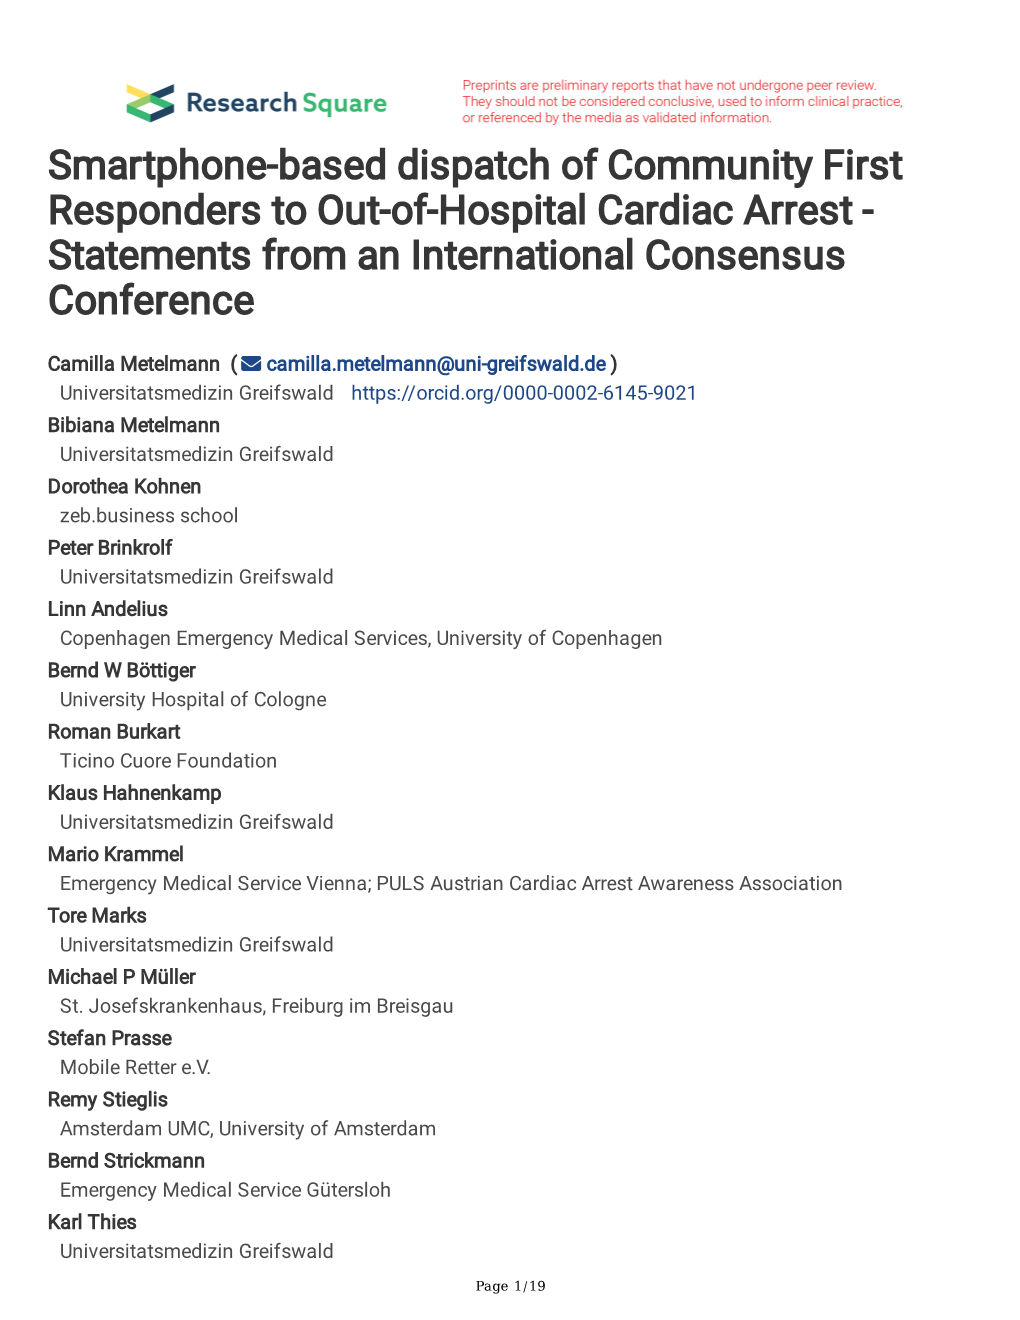 Smartphone-Based Dispatch of Community First Responders to Out-Of-Hospital Cardiac Arrest - Statements from an International Consensus Conference